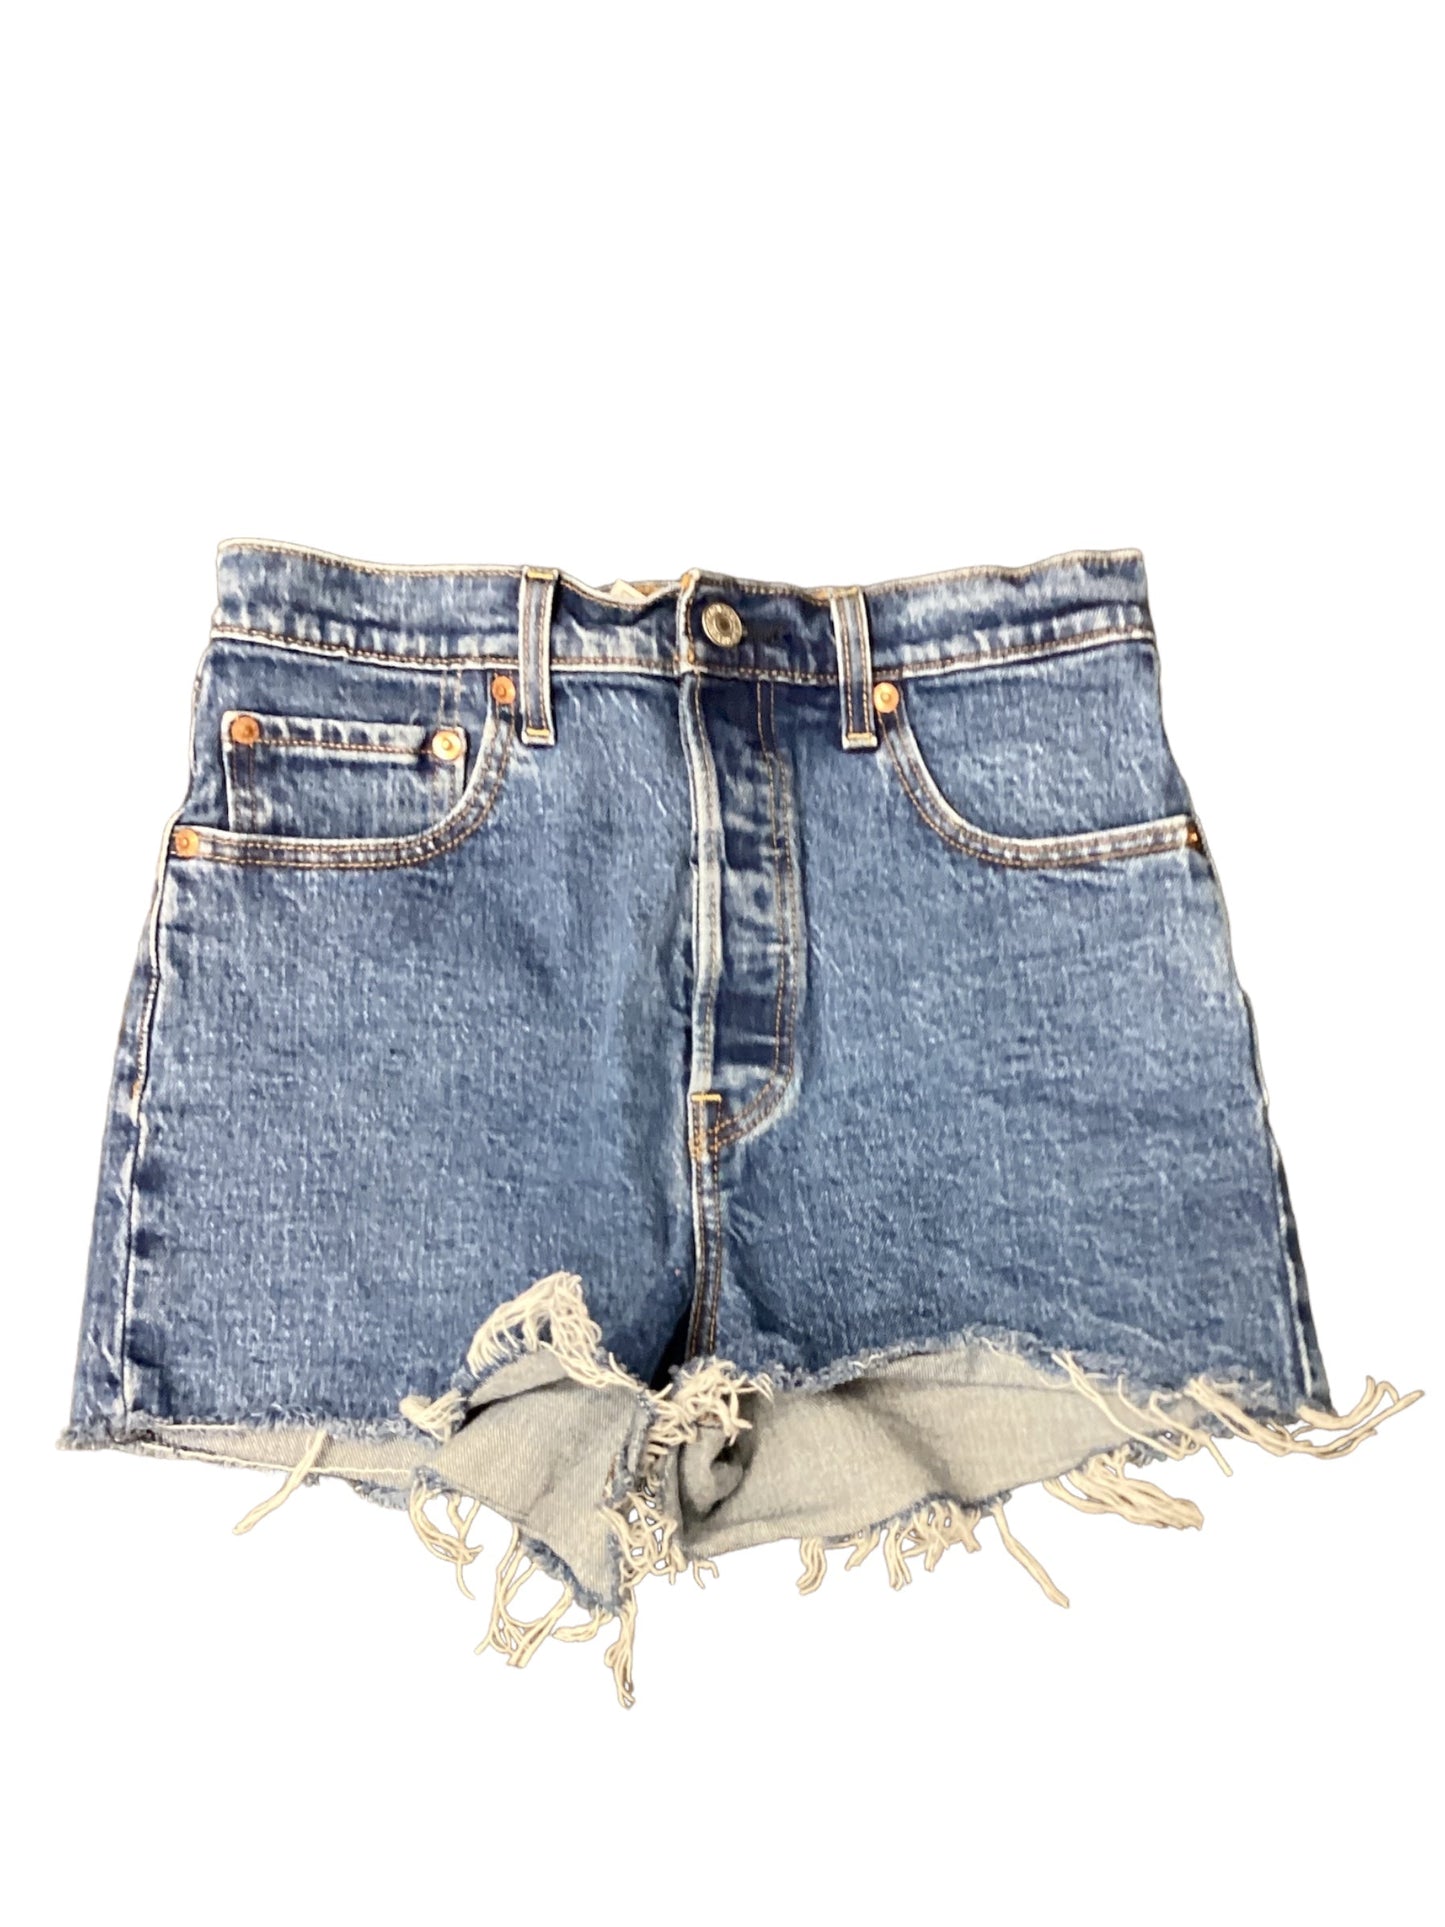 Shorts By Levis  Size: 6a